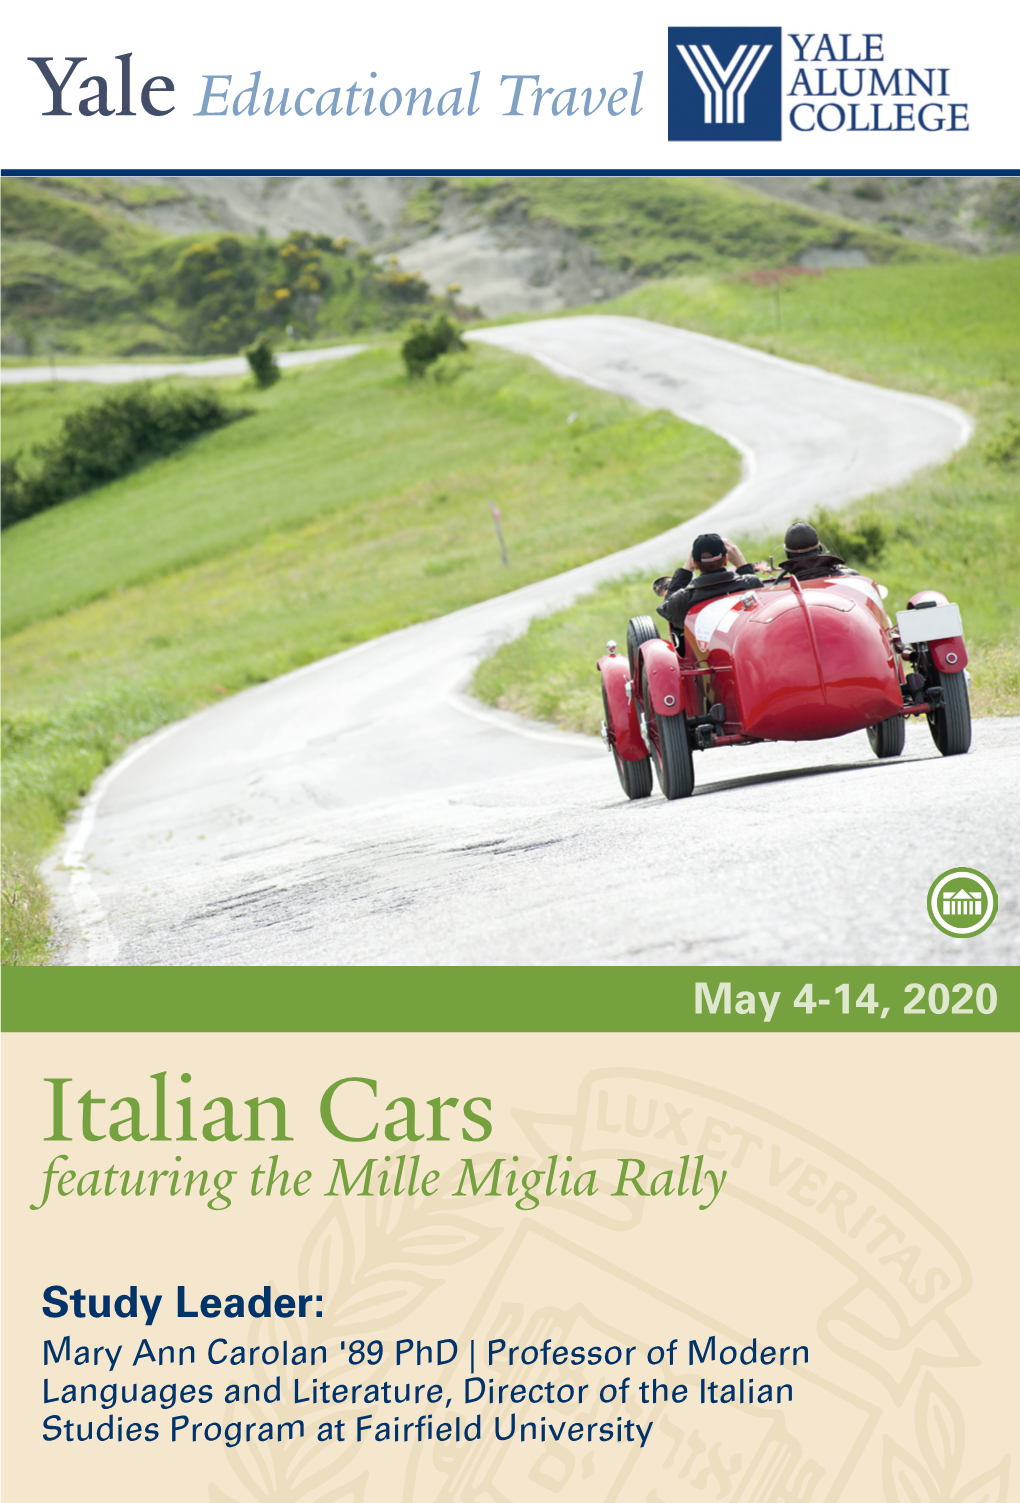 Italian Cars We Look Forward to Welcoming You on This Exclusive Foray Into the World of Italy’S Classic Cars